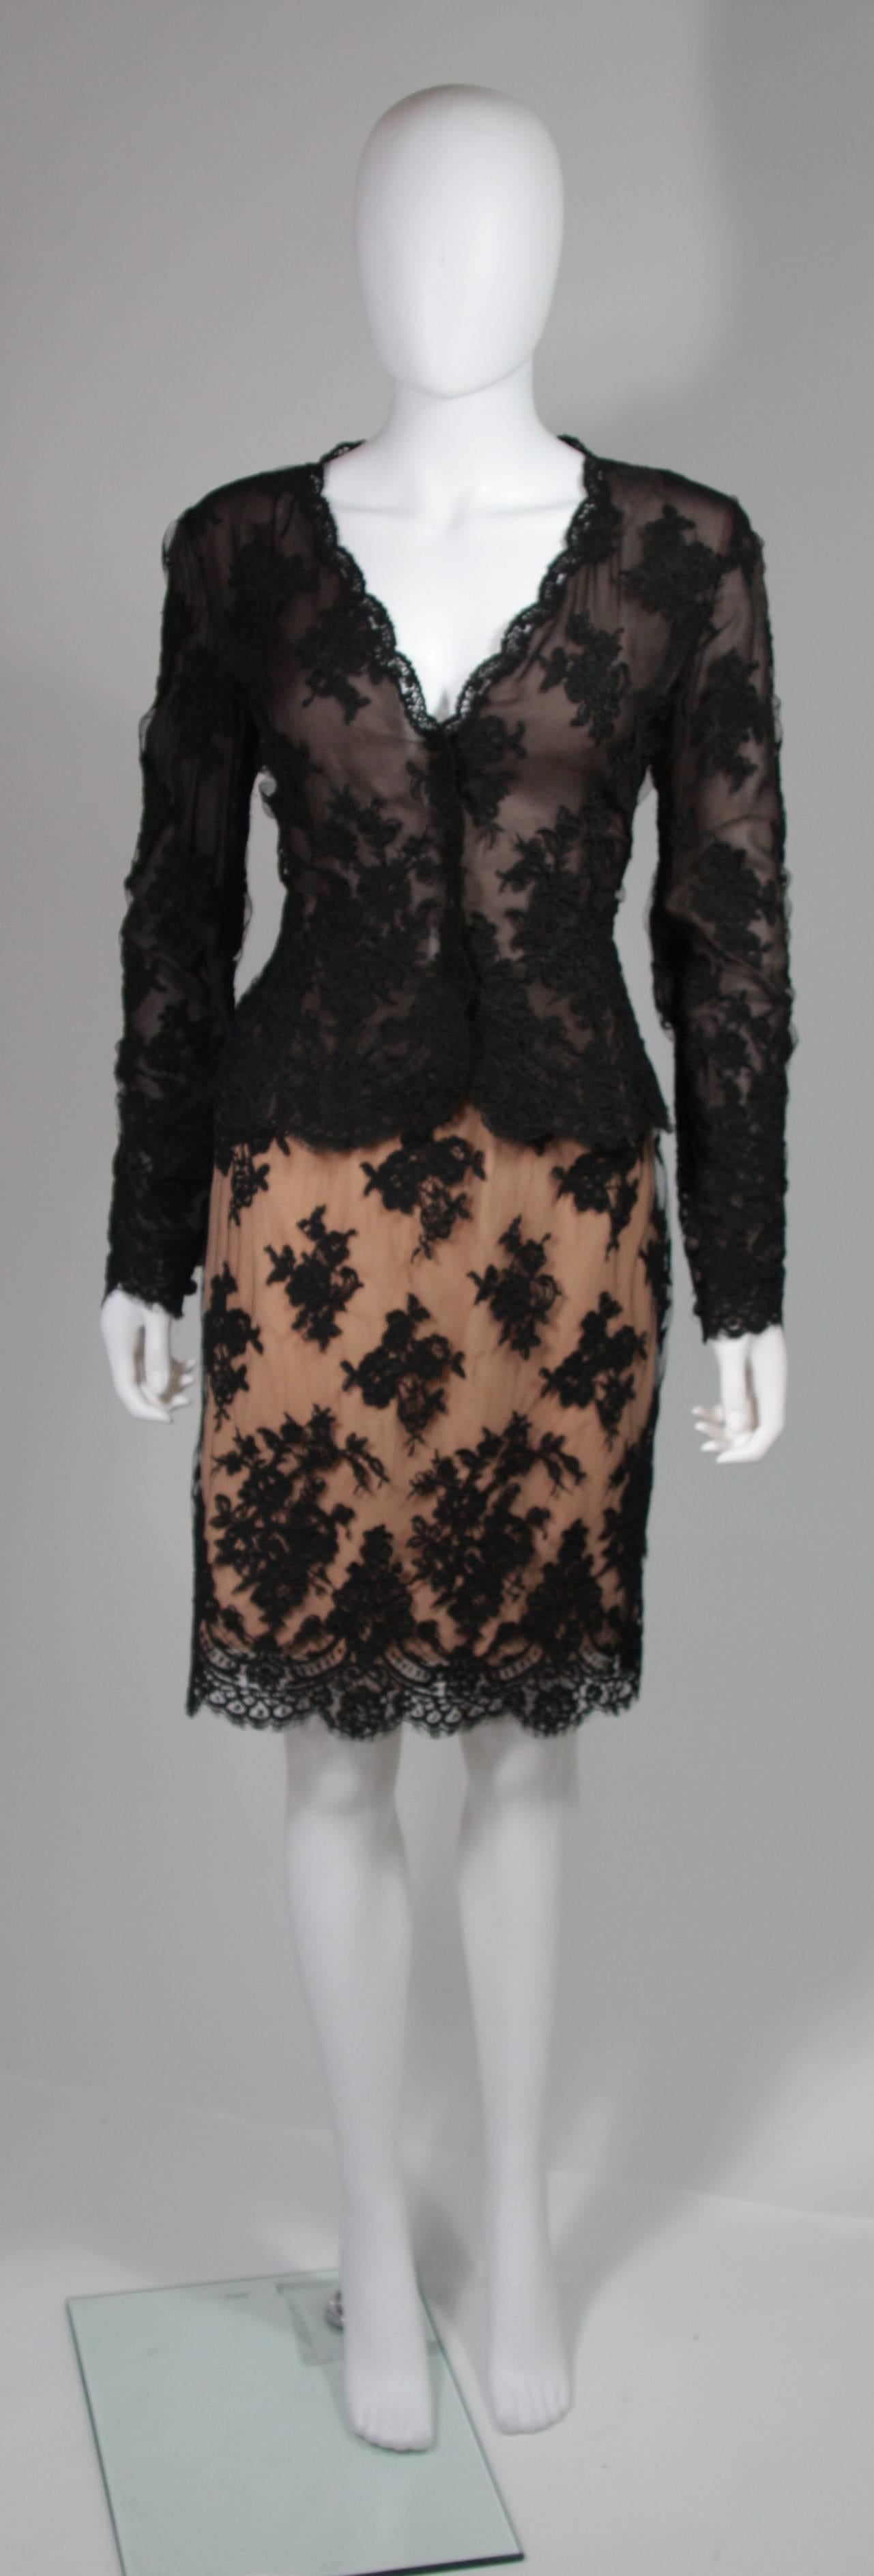 This Bill Blass skirt set is composed of a black lace with nude underlay accents on the skirt. The blouse features scalloped edges and center front snap closures. The skirt has a zipper closure. In excellent condition. Made in USA.

**Please